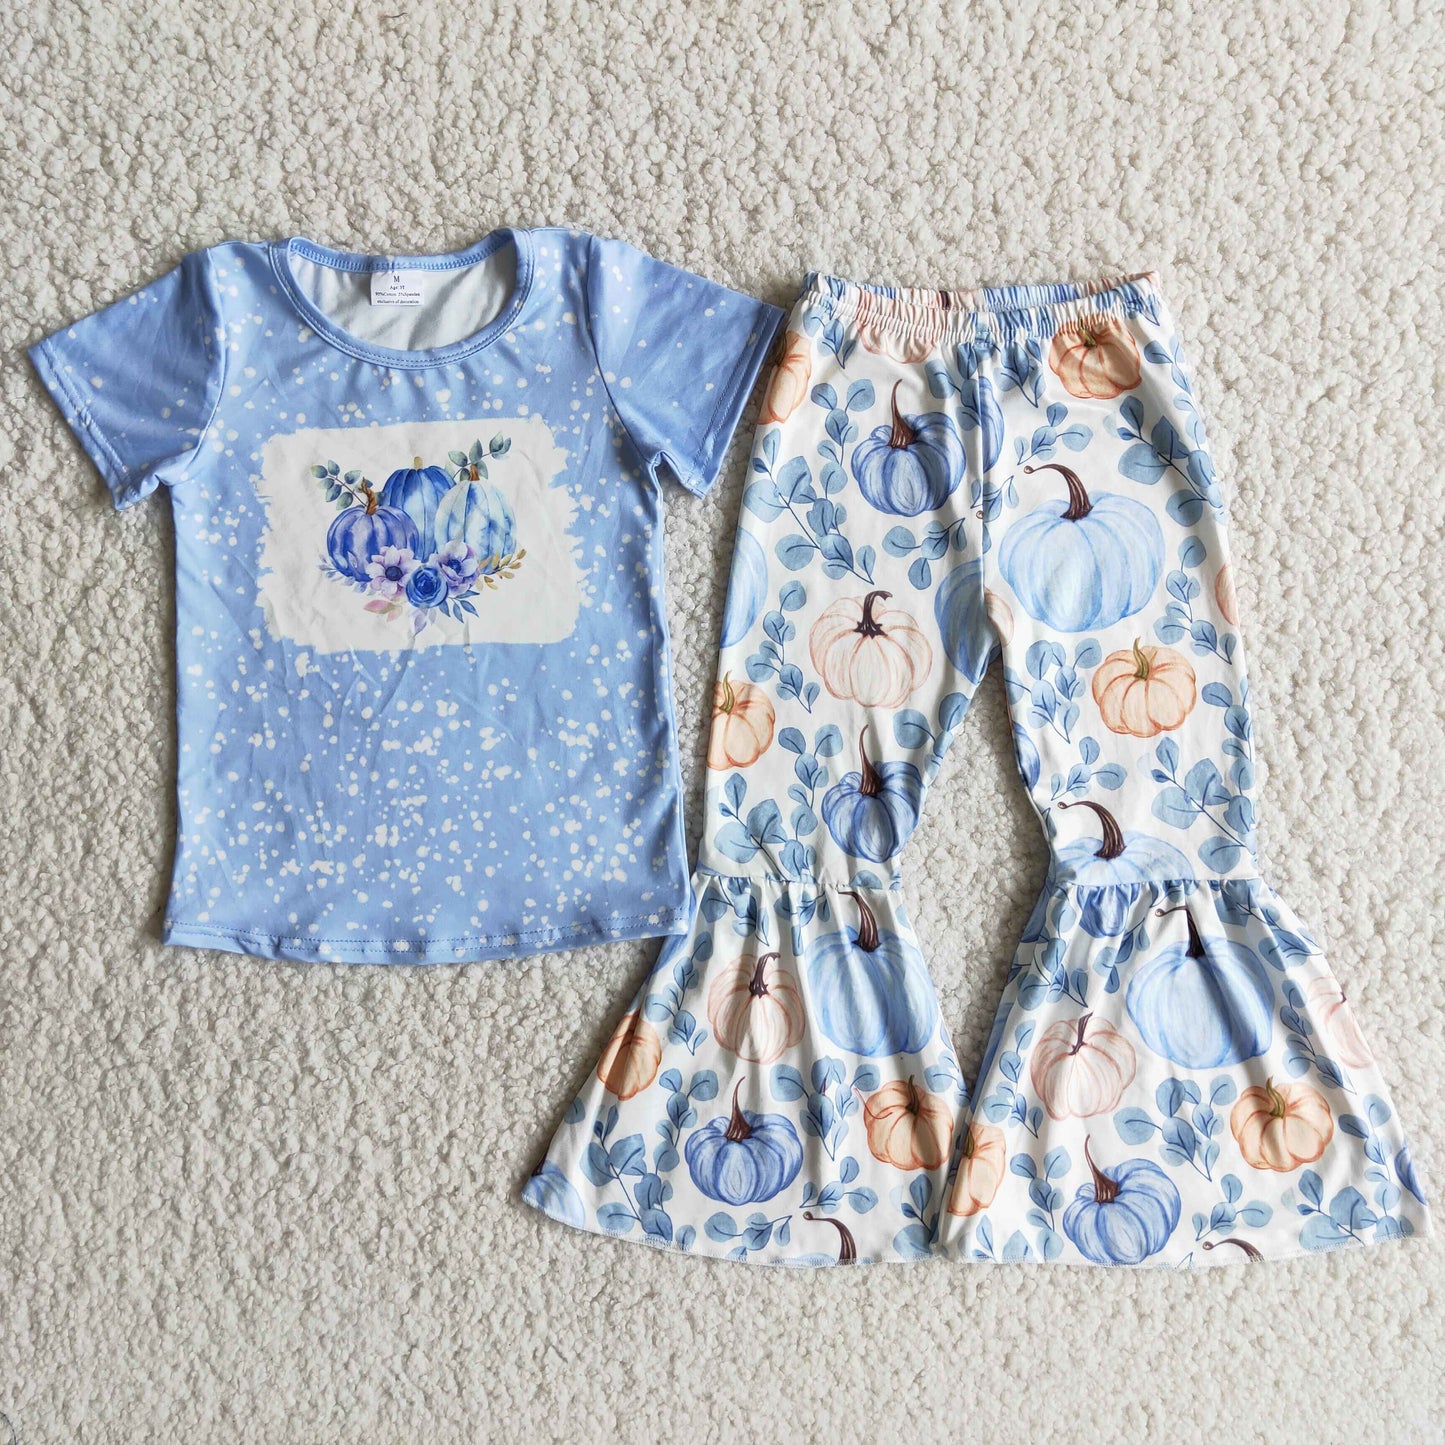 Baby girls blue floral pumpkin outfit